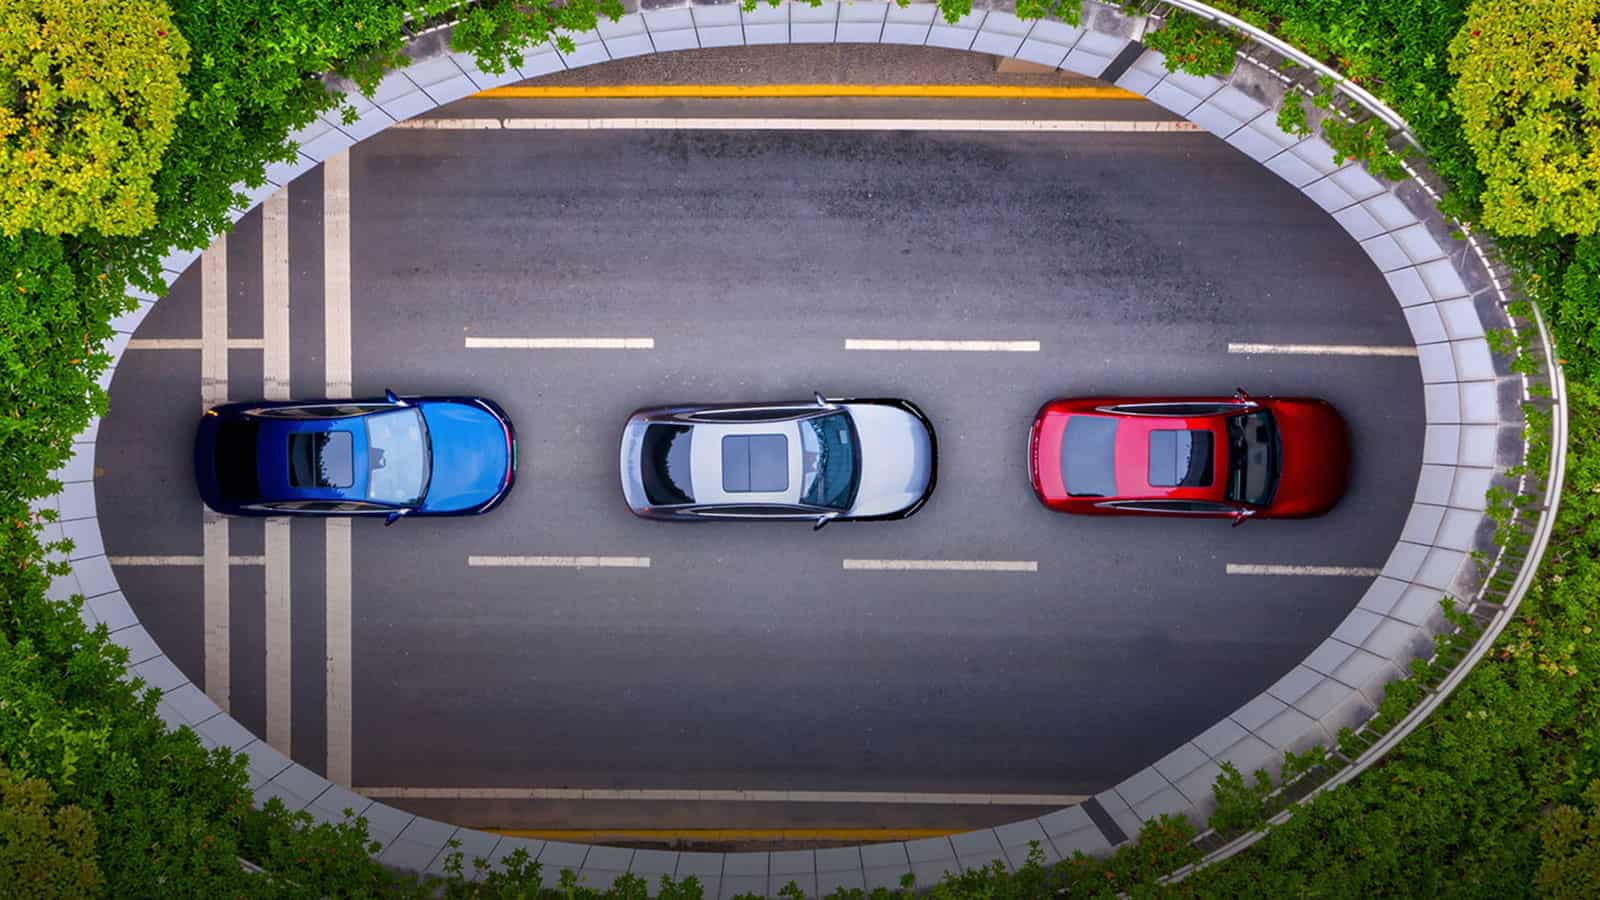 3 BYD vehicles aerial view through round treed opening to view road, may be soon manufactured in Mexico.